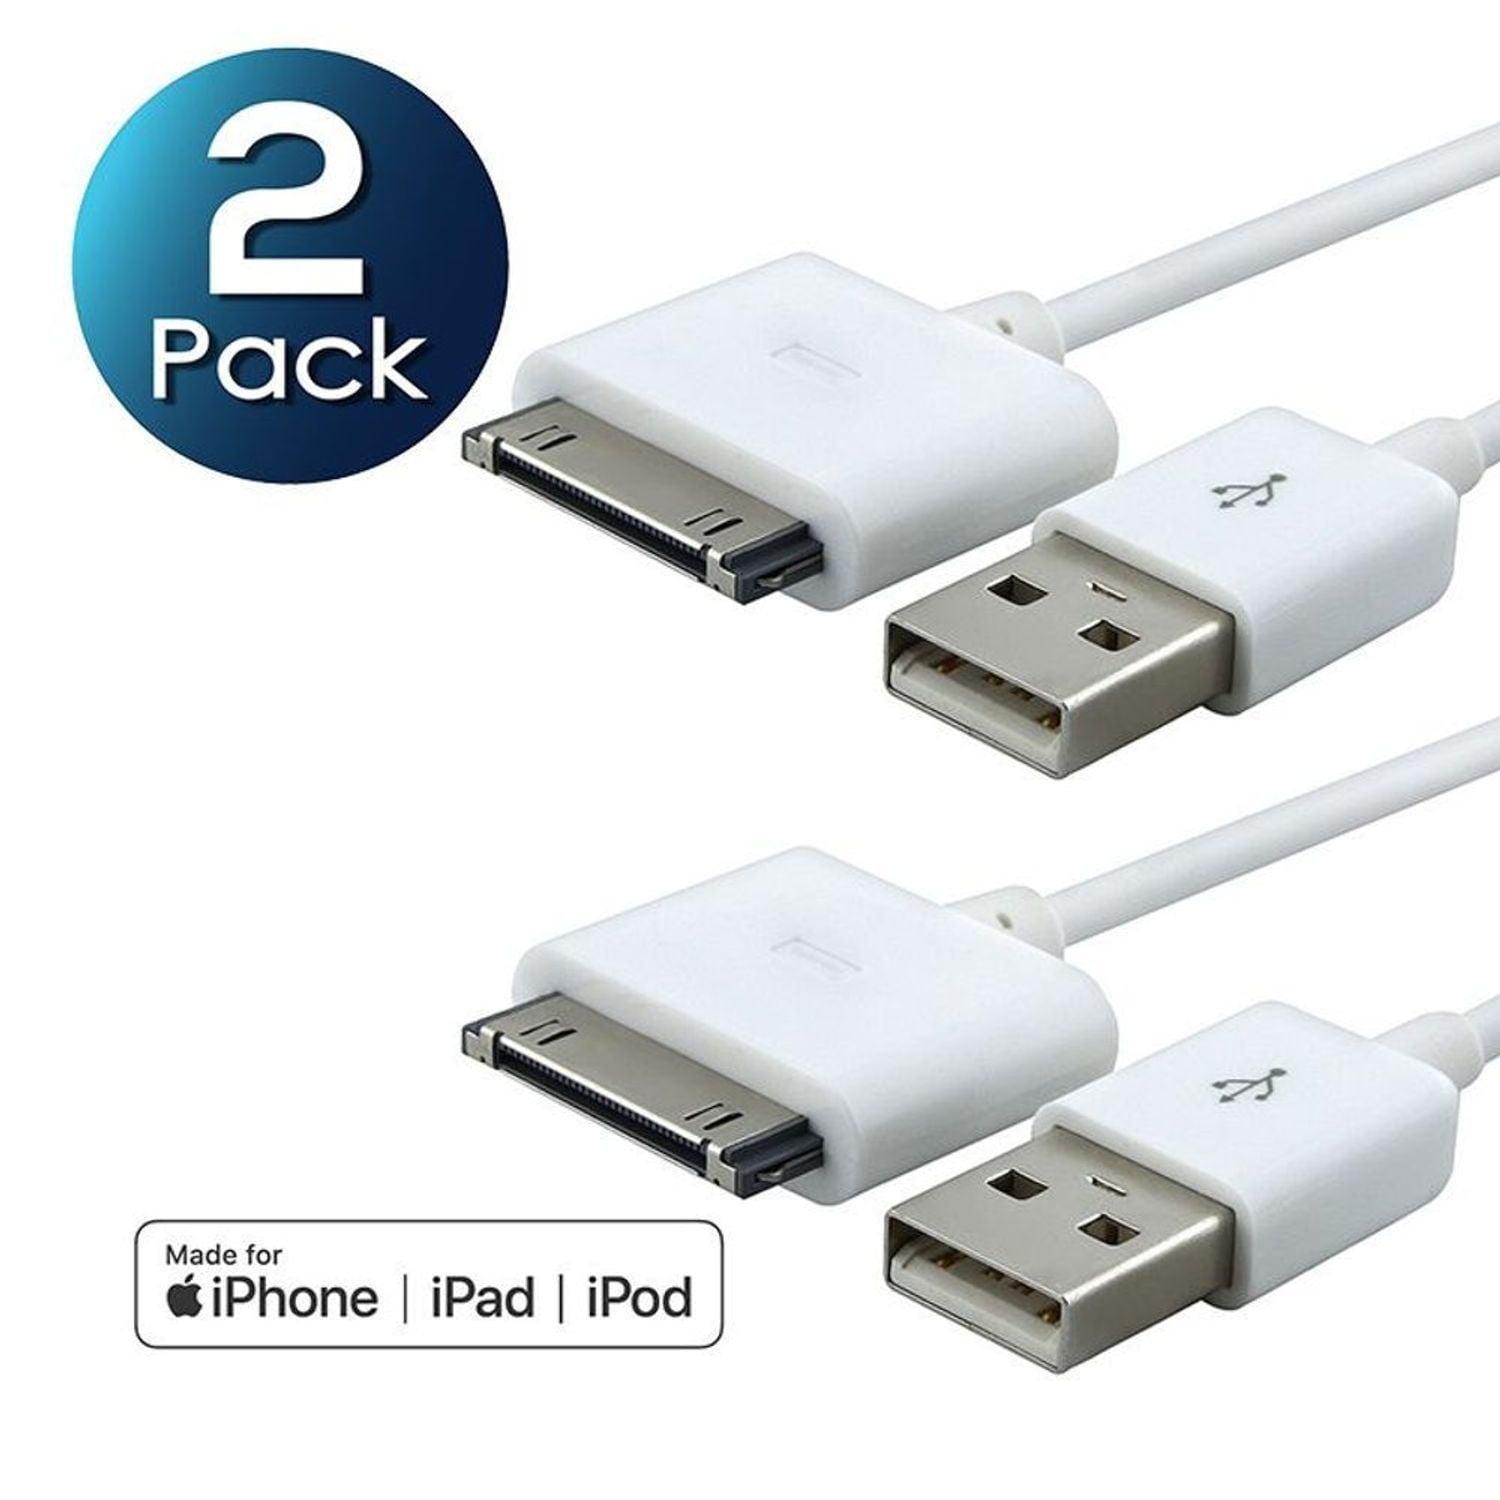 2IN1 30-PIN CHARGEUR CHARGER CHARGING DATA CABLE 1M IPHONE 3G 3GS 4 4S IPAD IPOD 